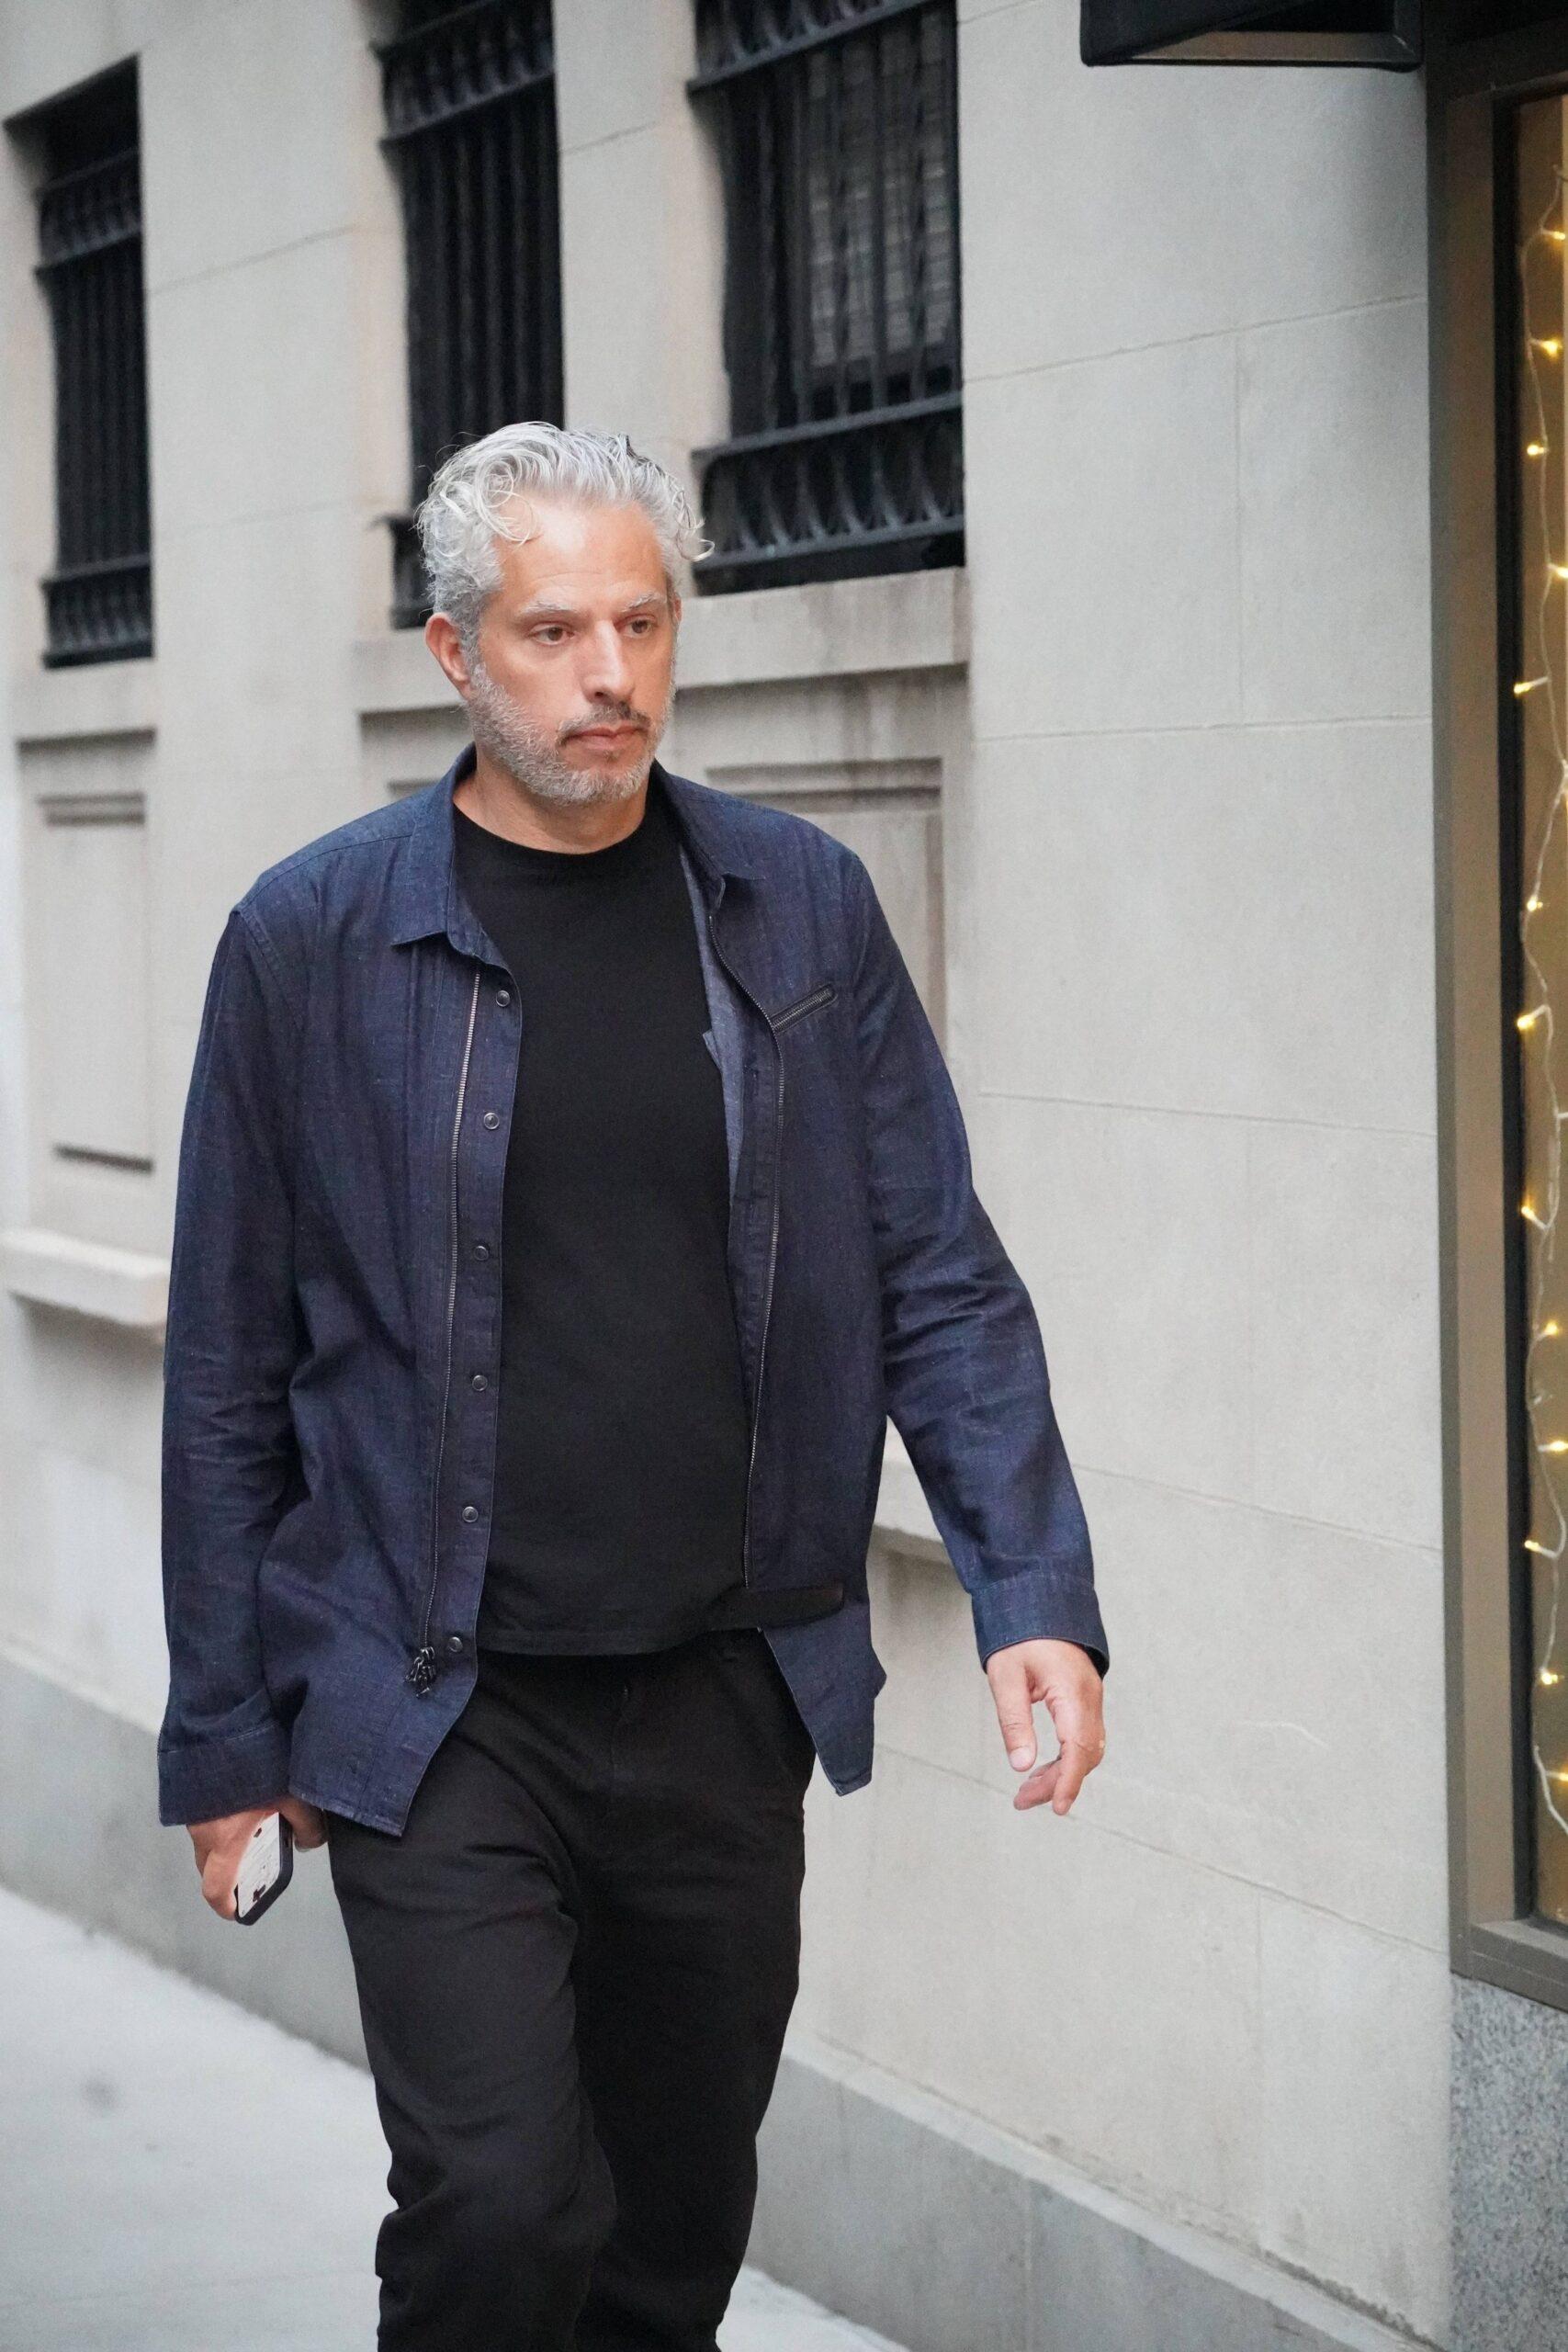 Madonna's manager Guy Oseary leaves her residence in Manhattan after visiting her after her return from the hospital 